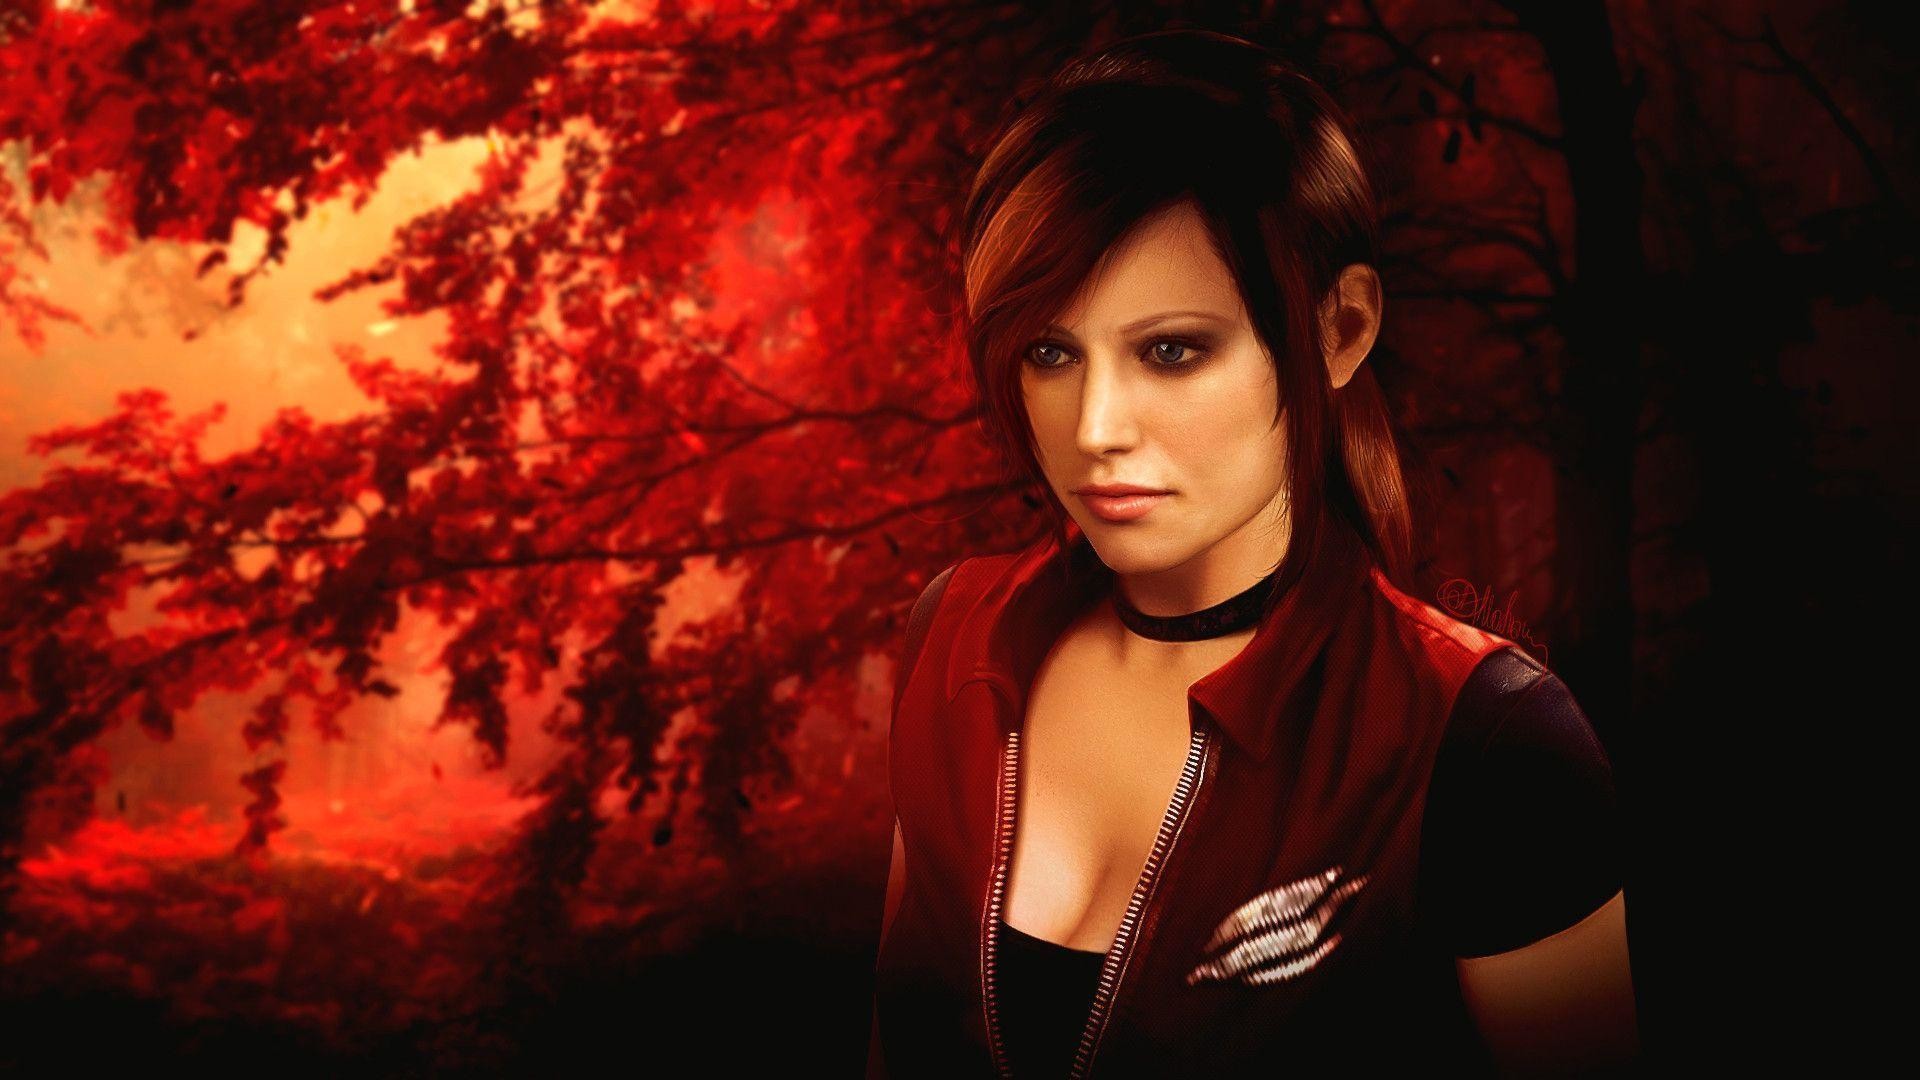 Resident evil claire redfield